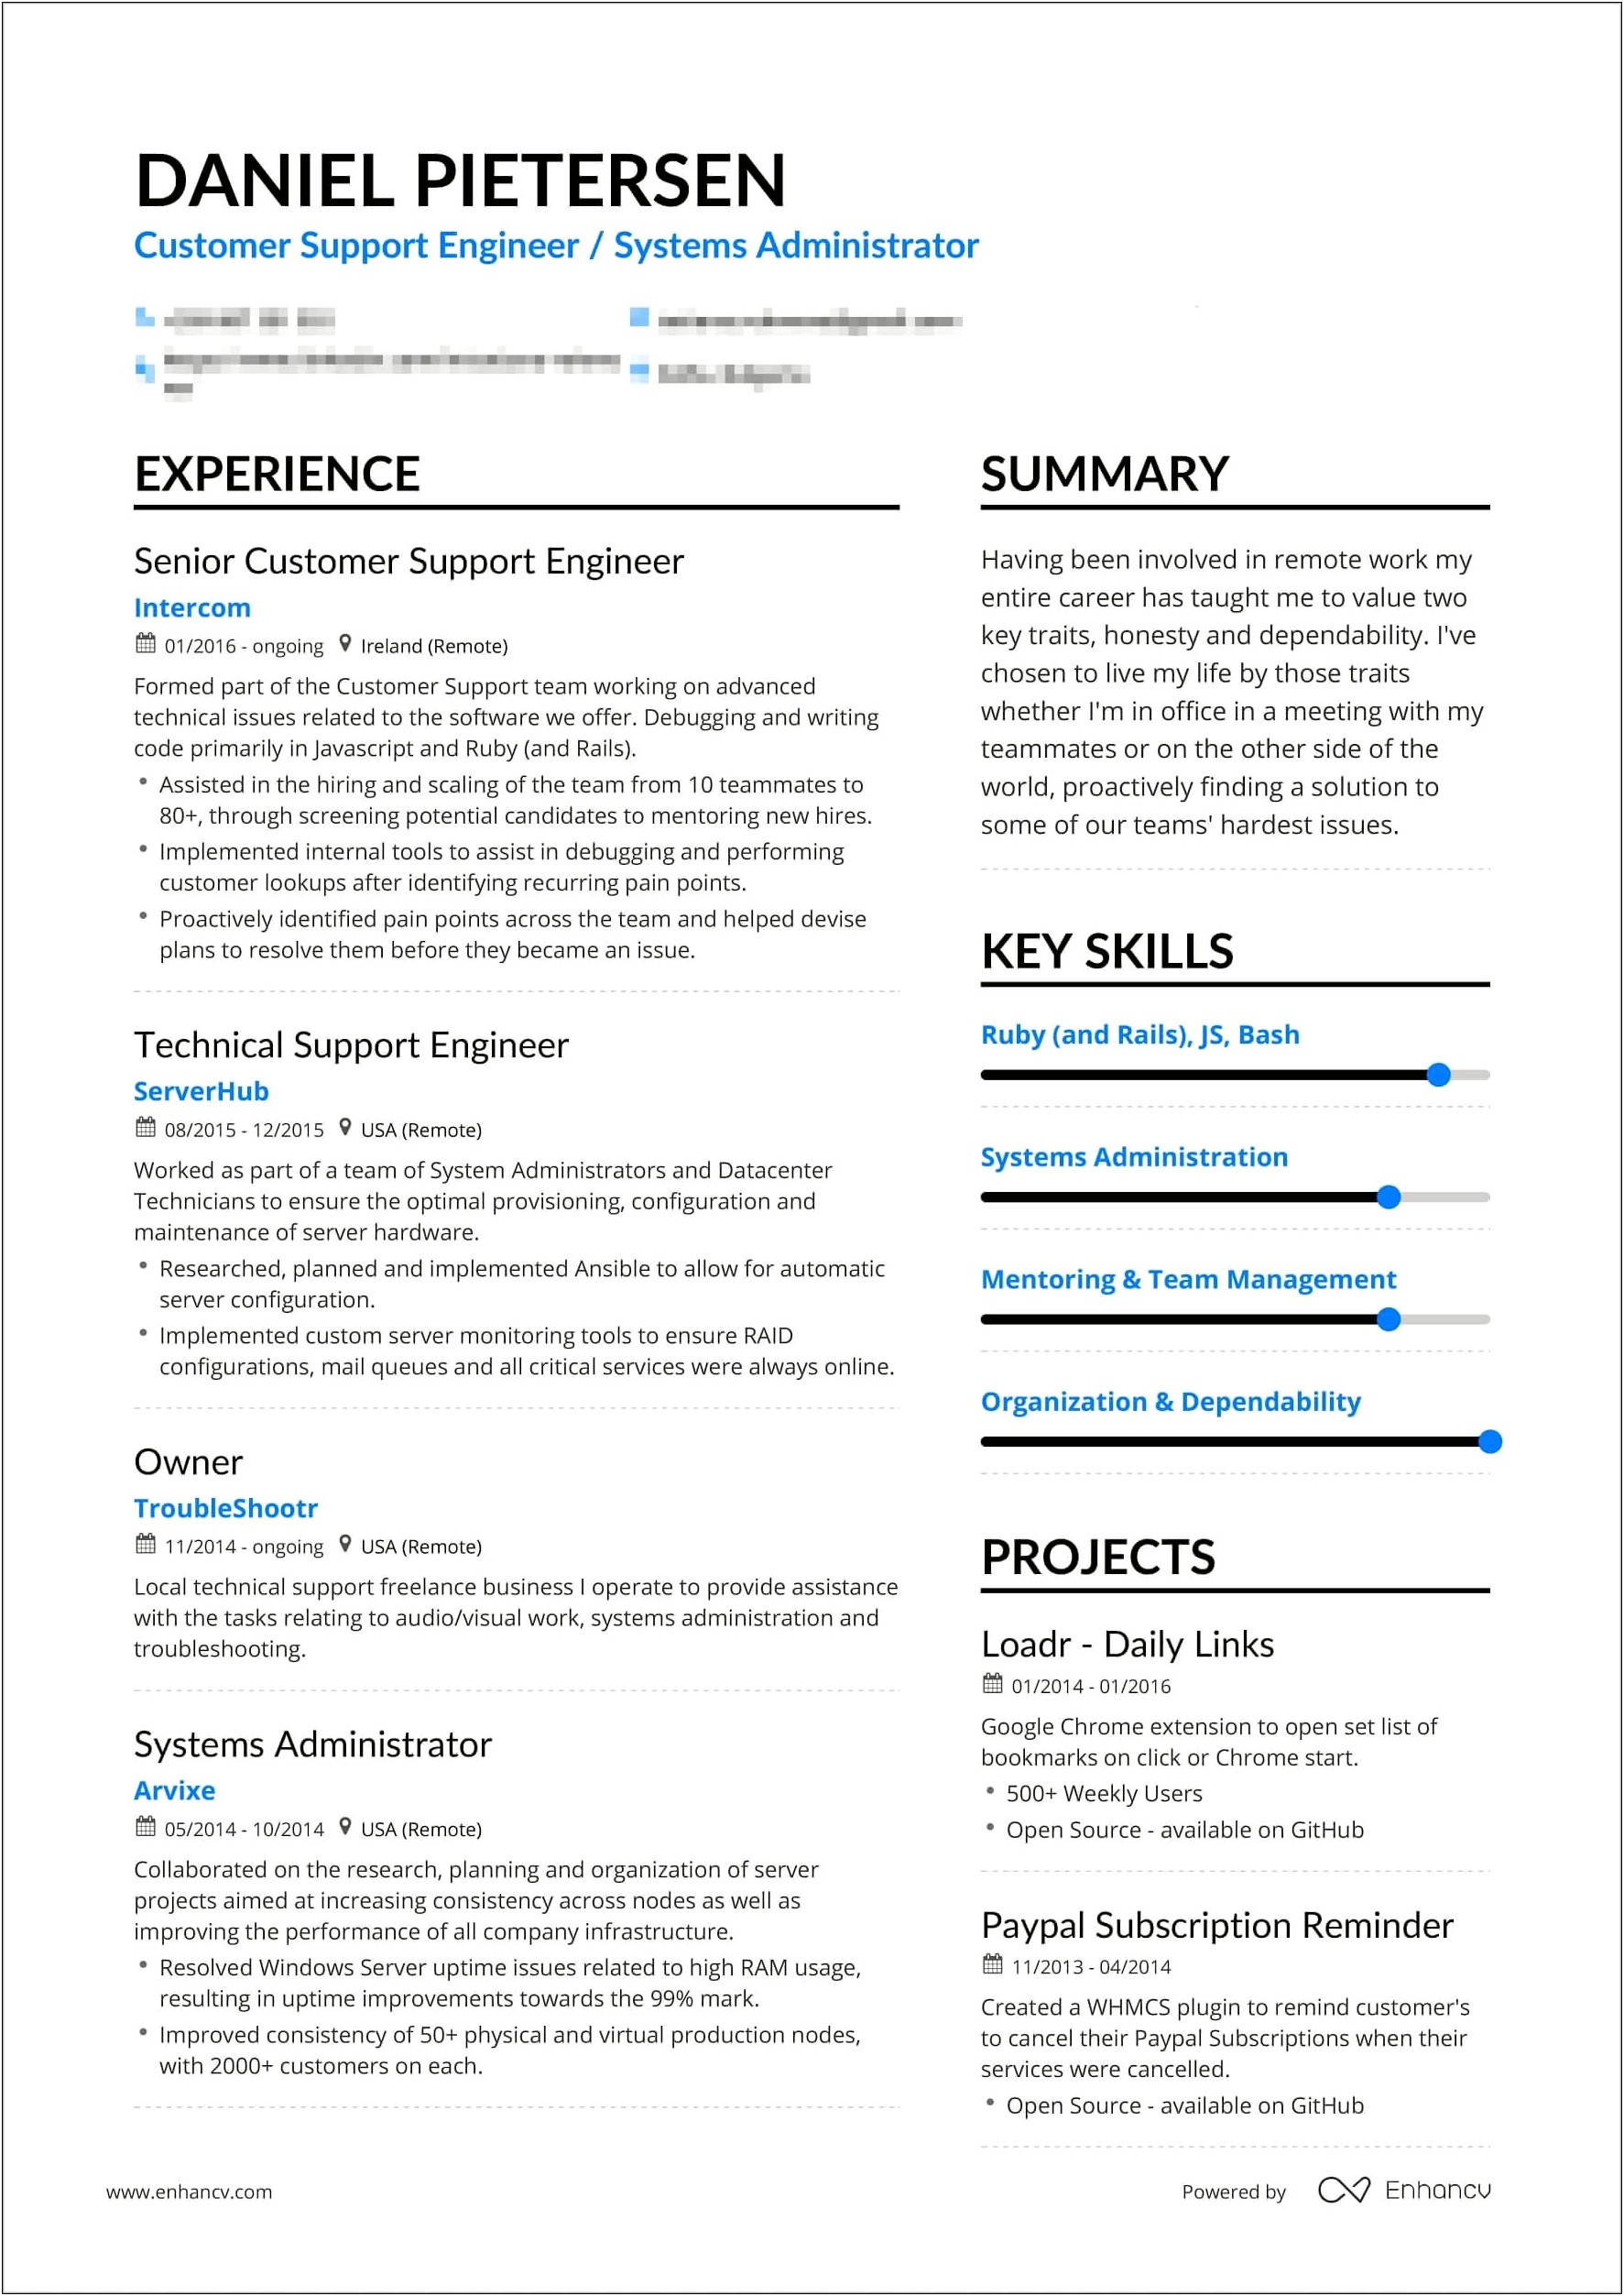 Where Should Skills Be Listed On A Resume